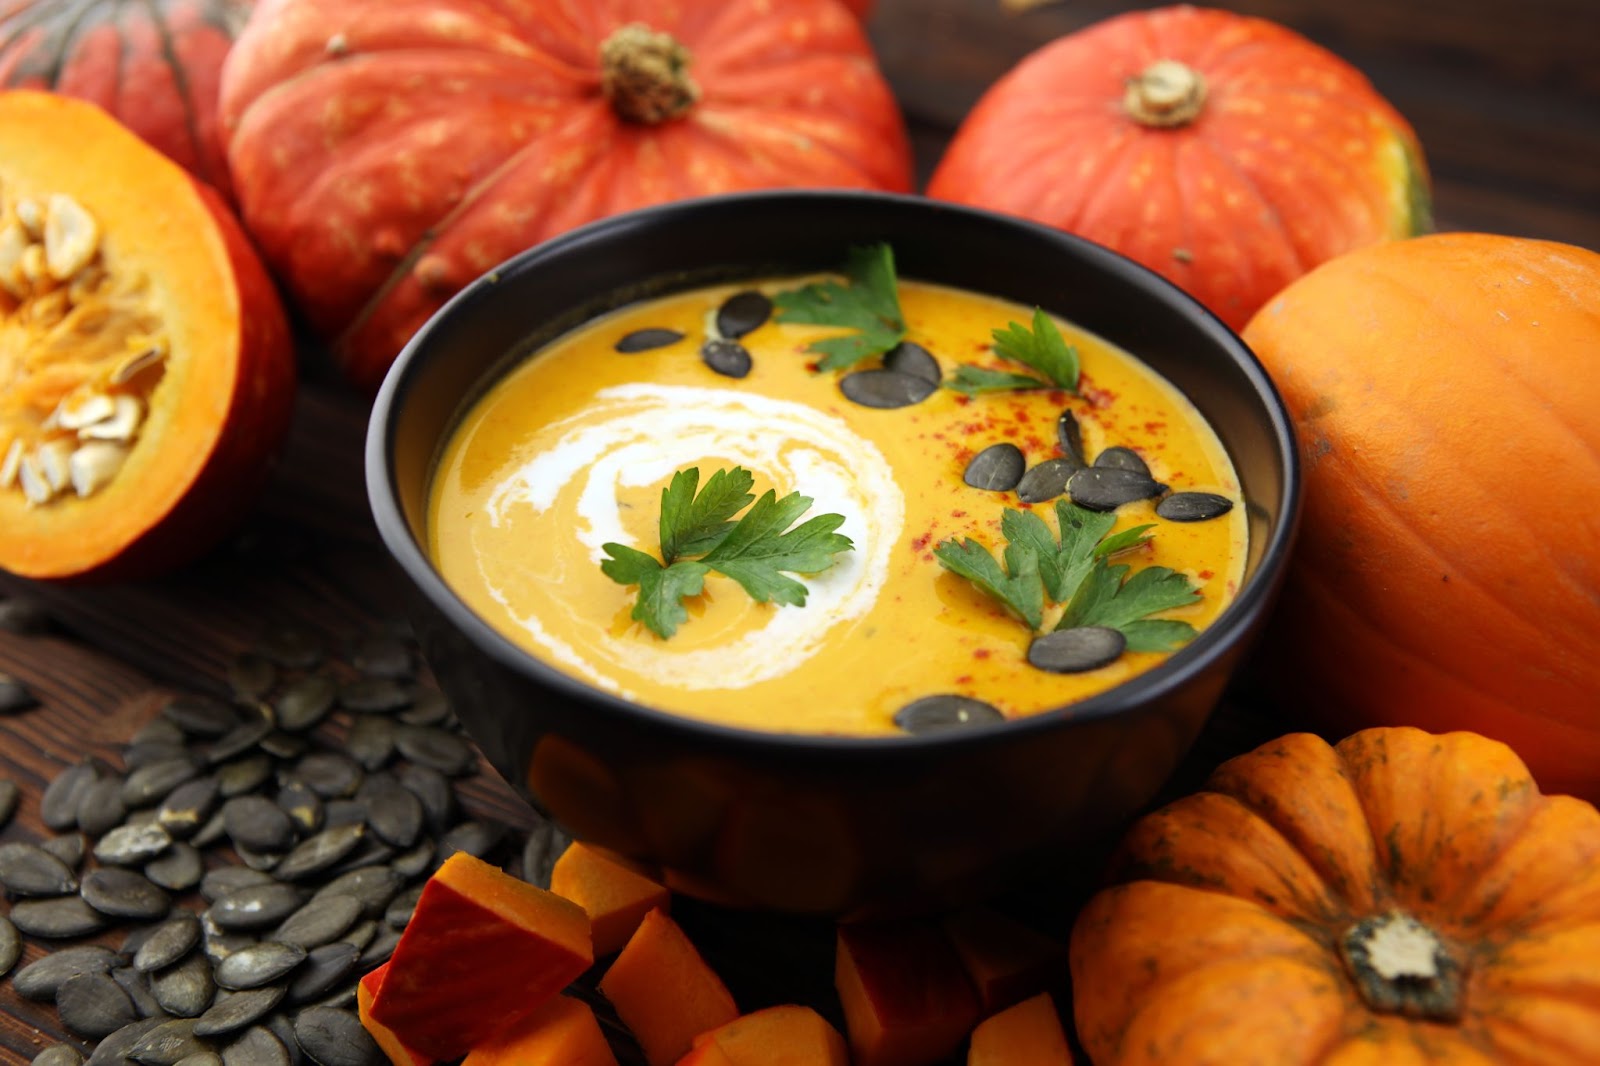 Carrot and pumpkin seed blend hot and creamy soup